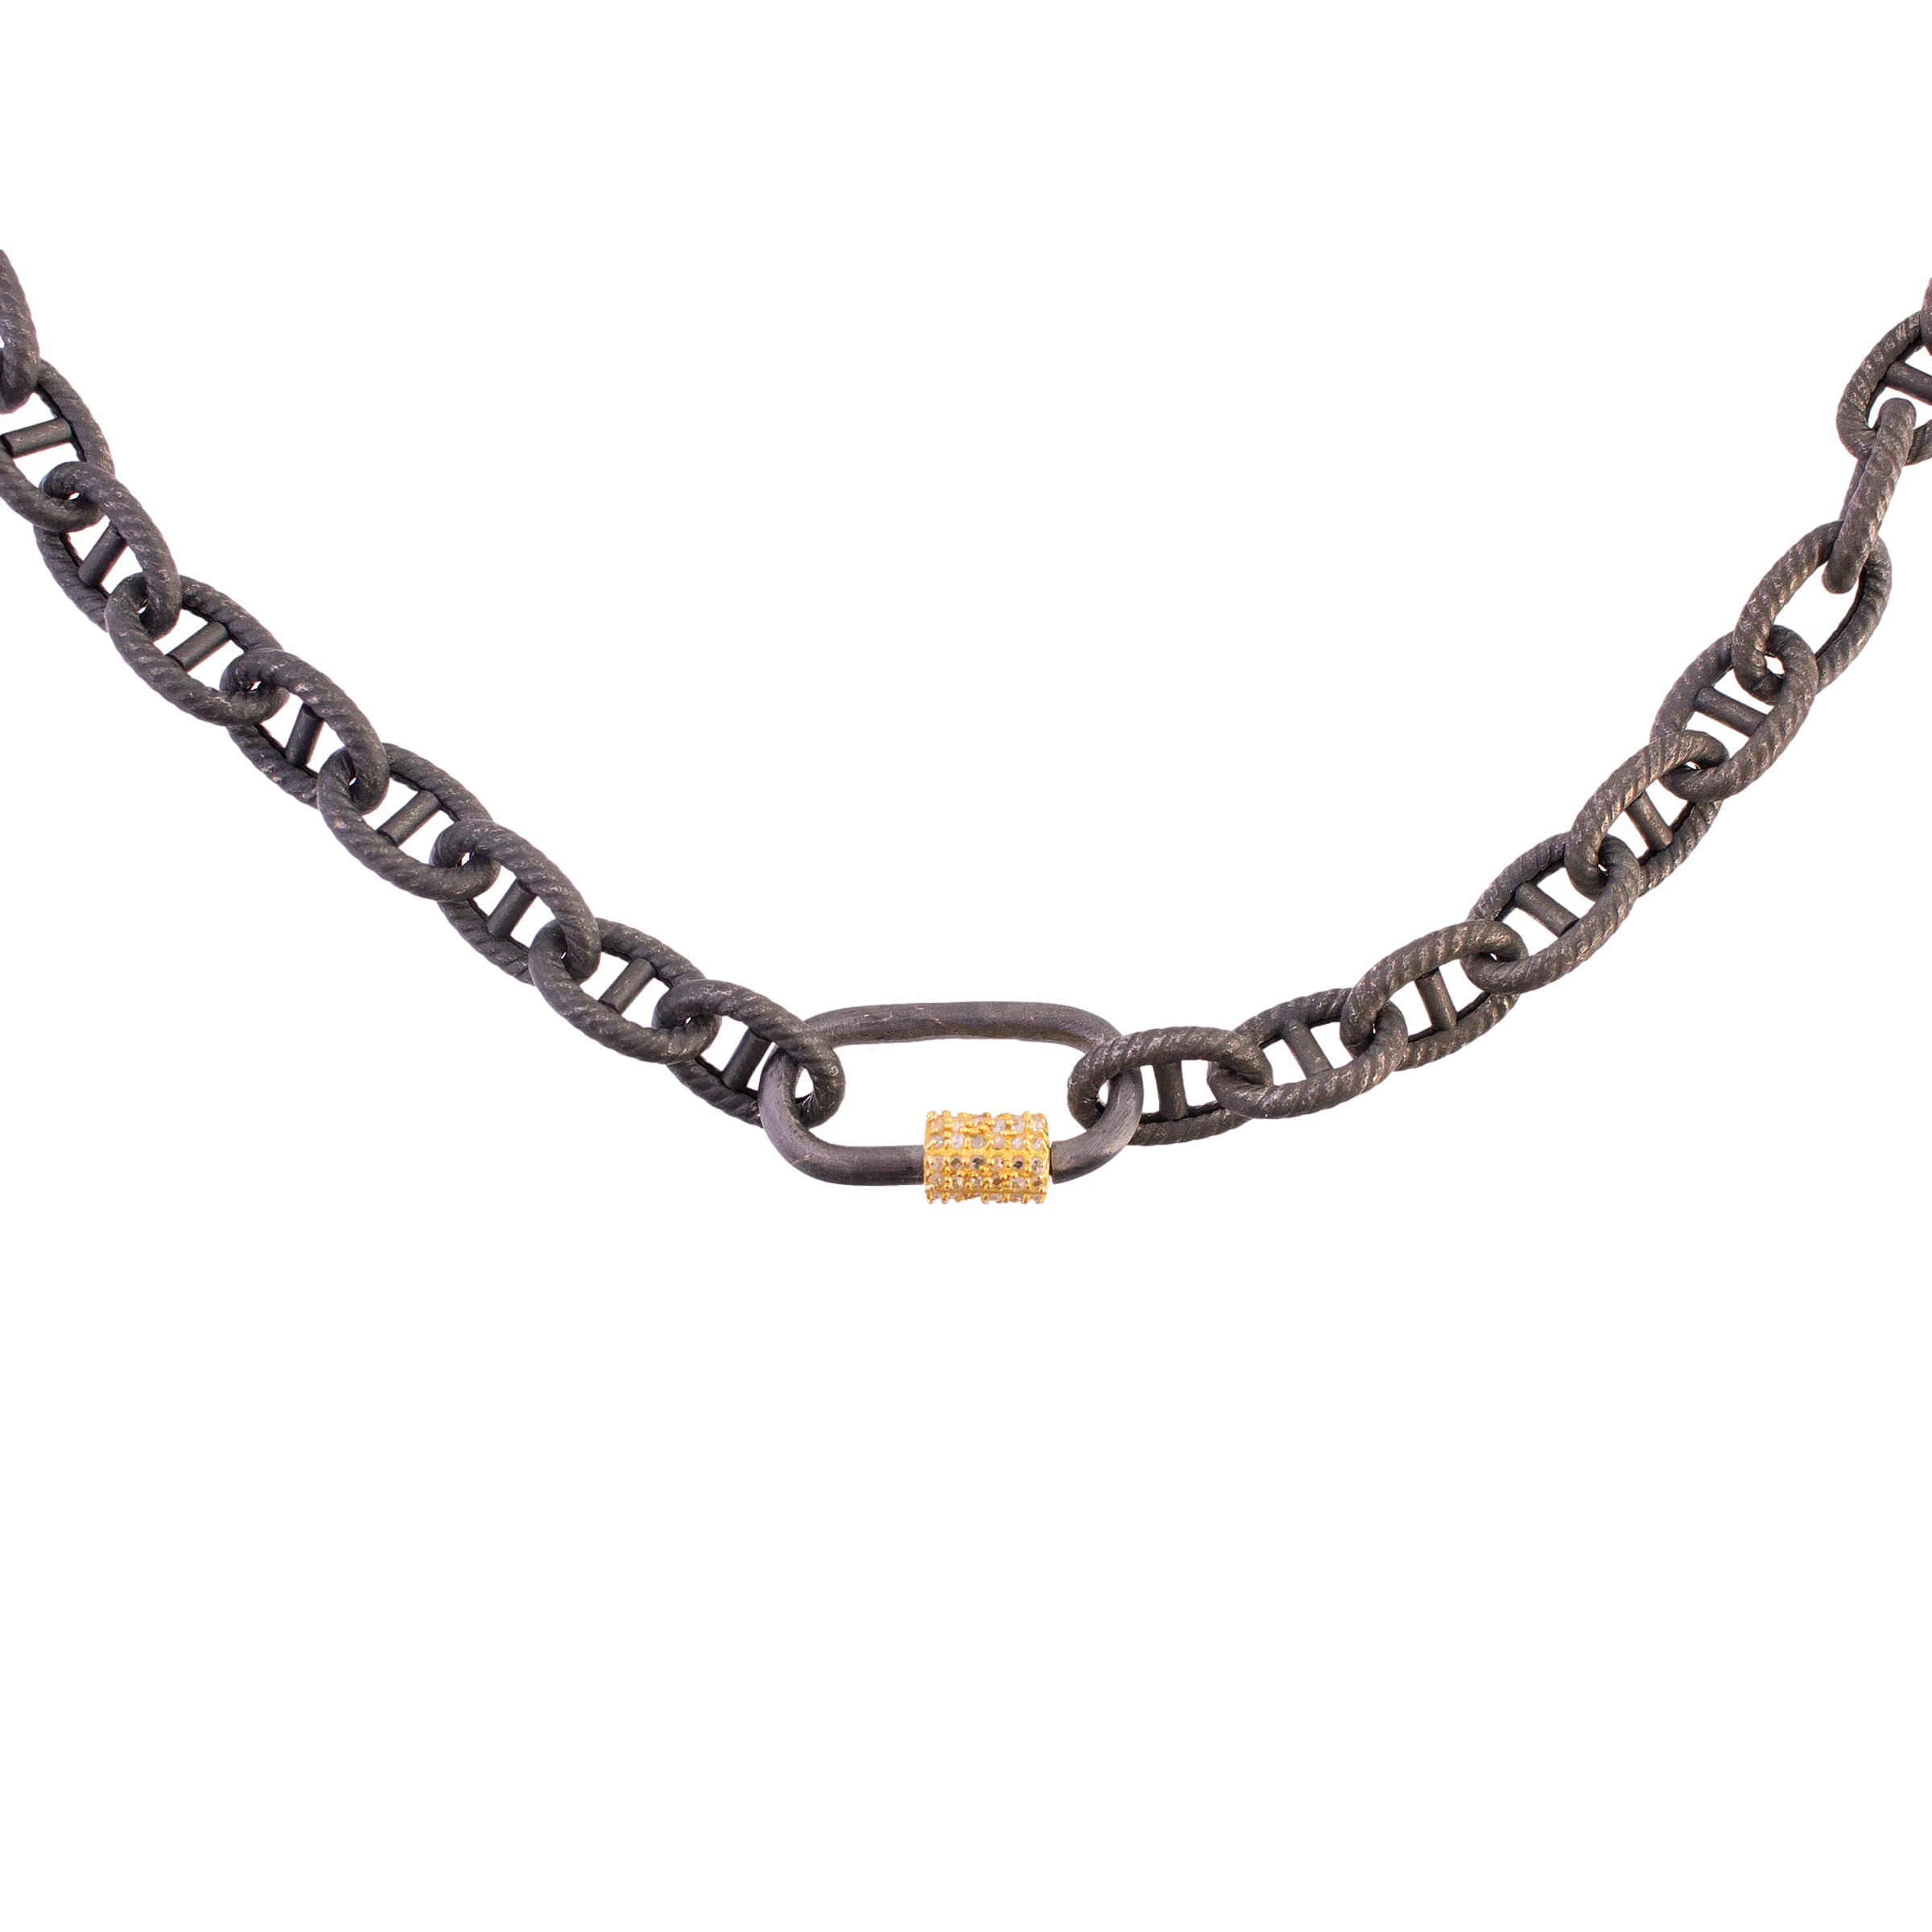 Oxidized Anchor Chain with Carabiner Clasp